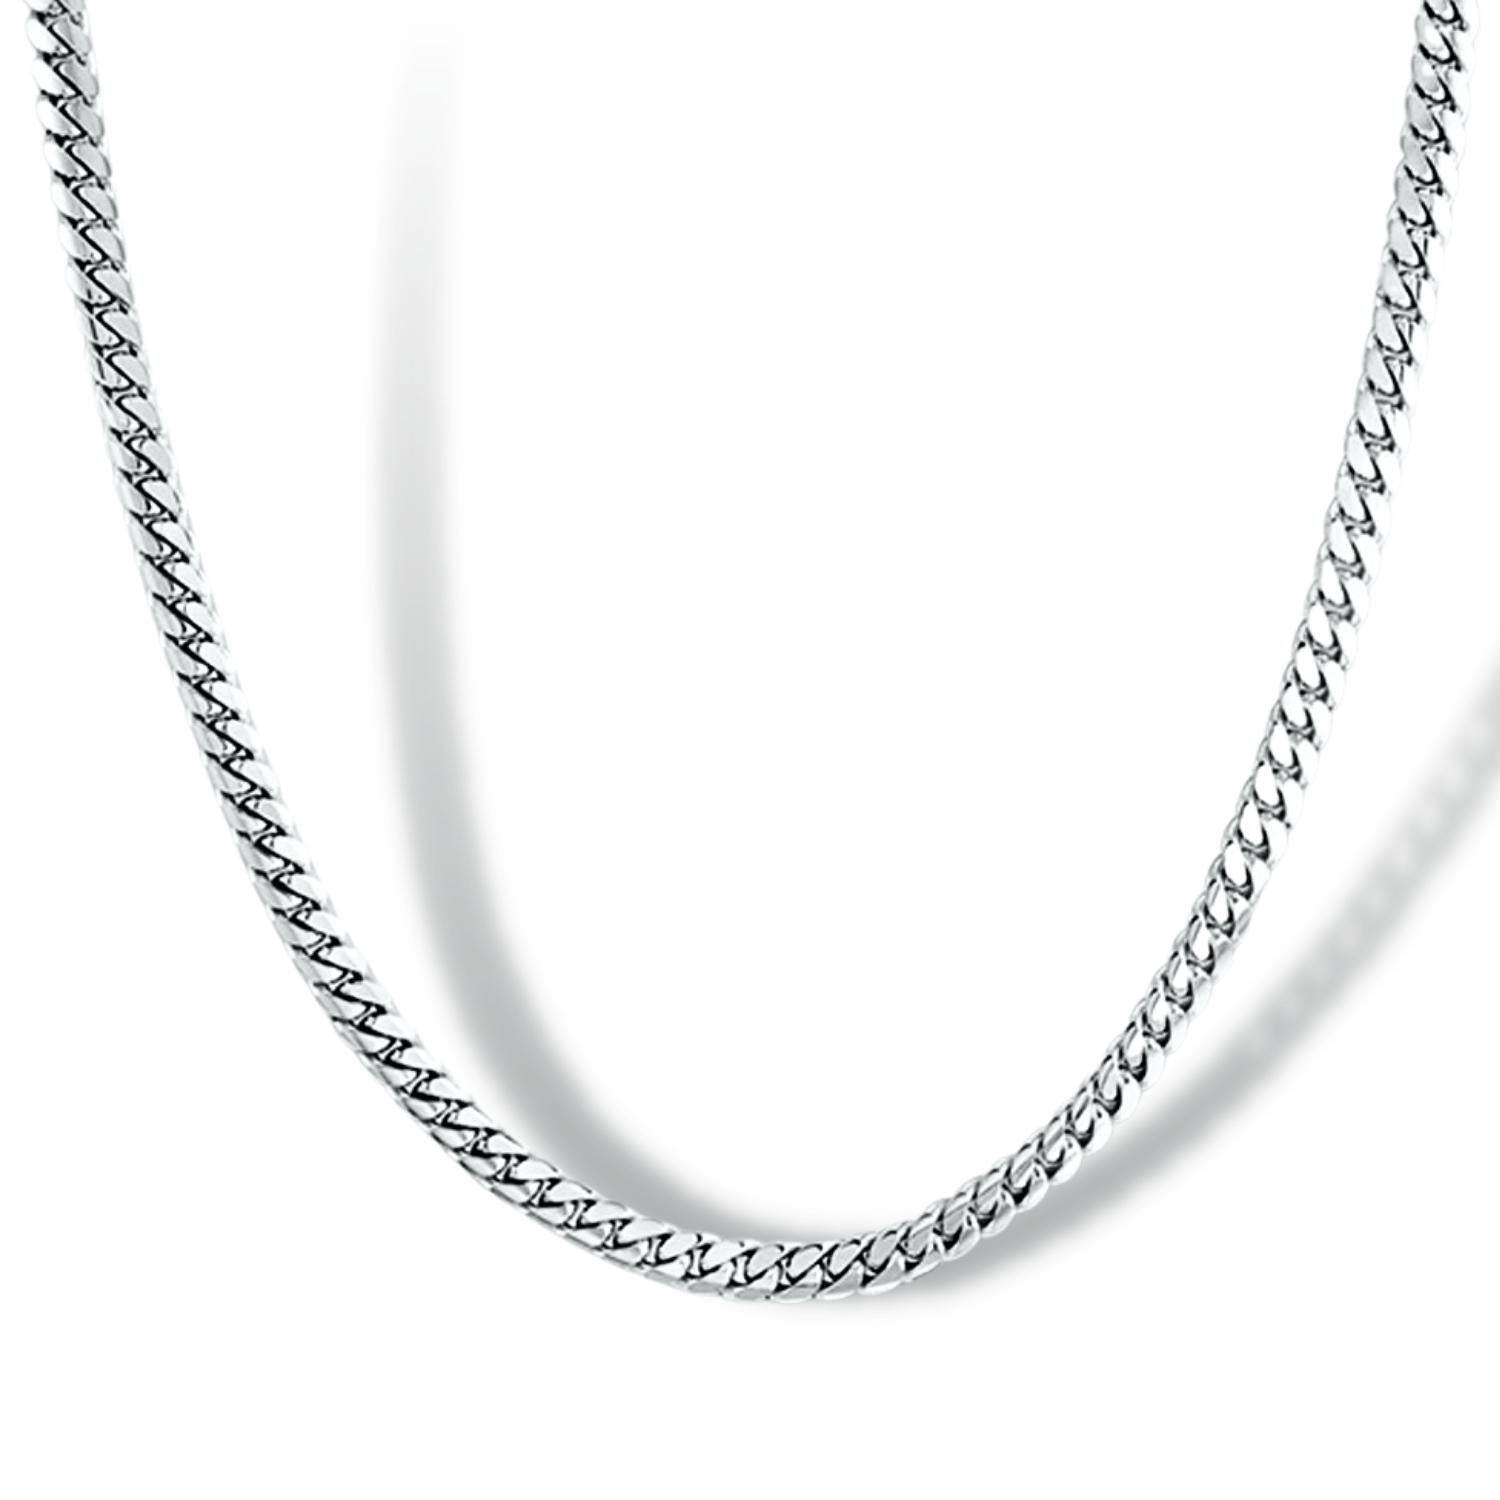 Solid White Gold Miami Cuban Chain 7.6mm Width